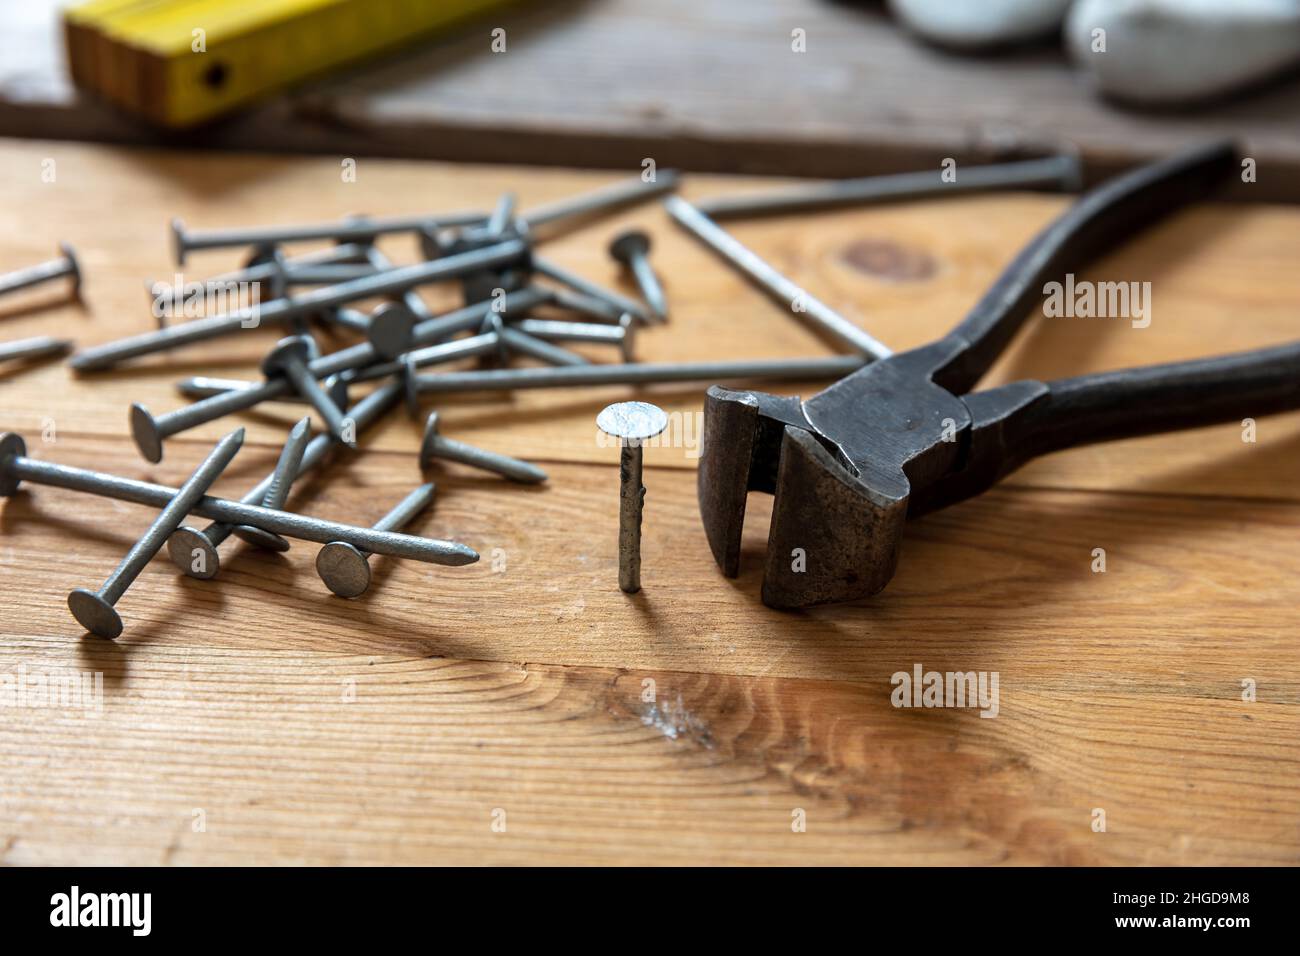 Pincers and nail stack on wood. Carpenter work bench table, closeup view, joinery workshop Stock Photo